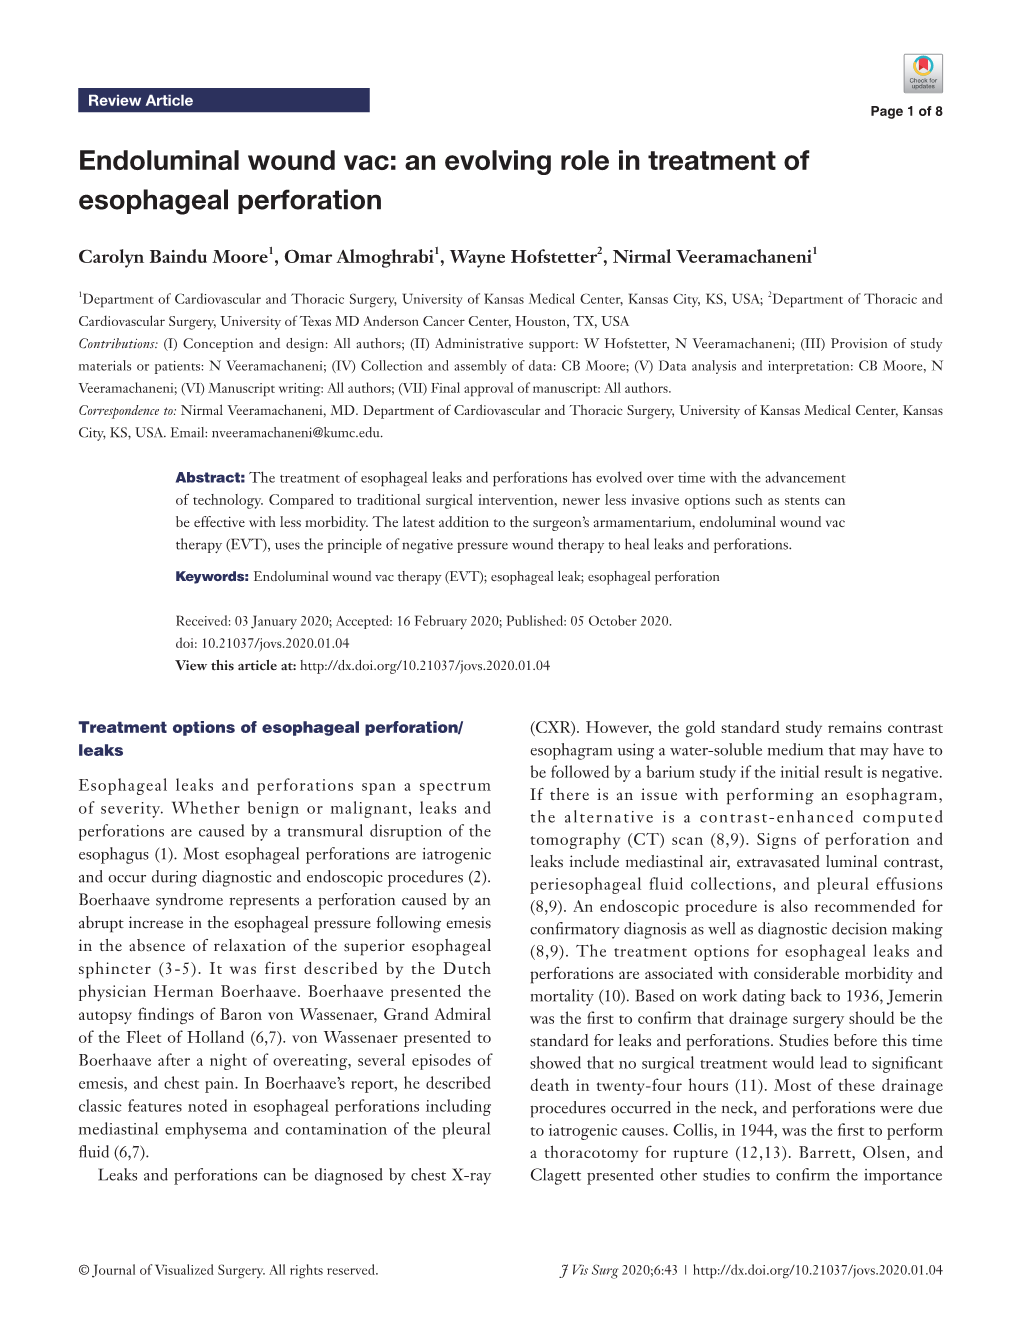 Endoluminal Wound Vac: an Evolving Role in Treatment of Esophageal Perforation